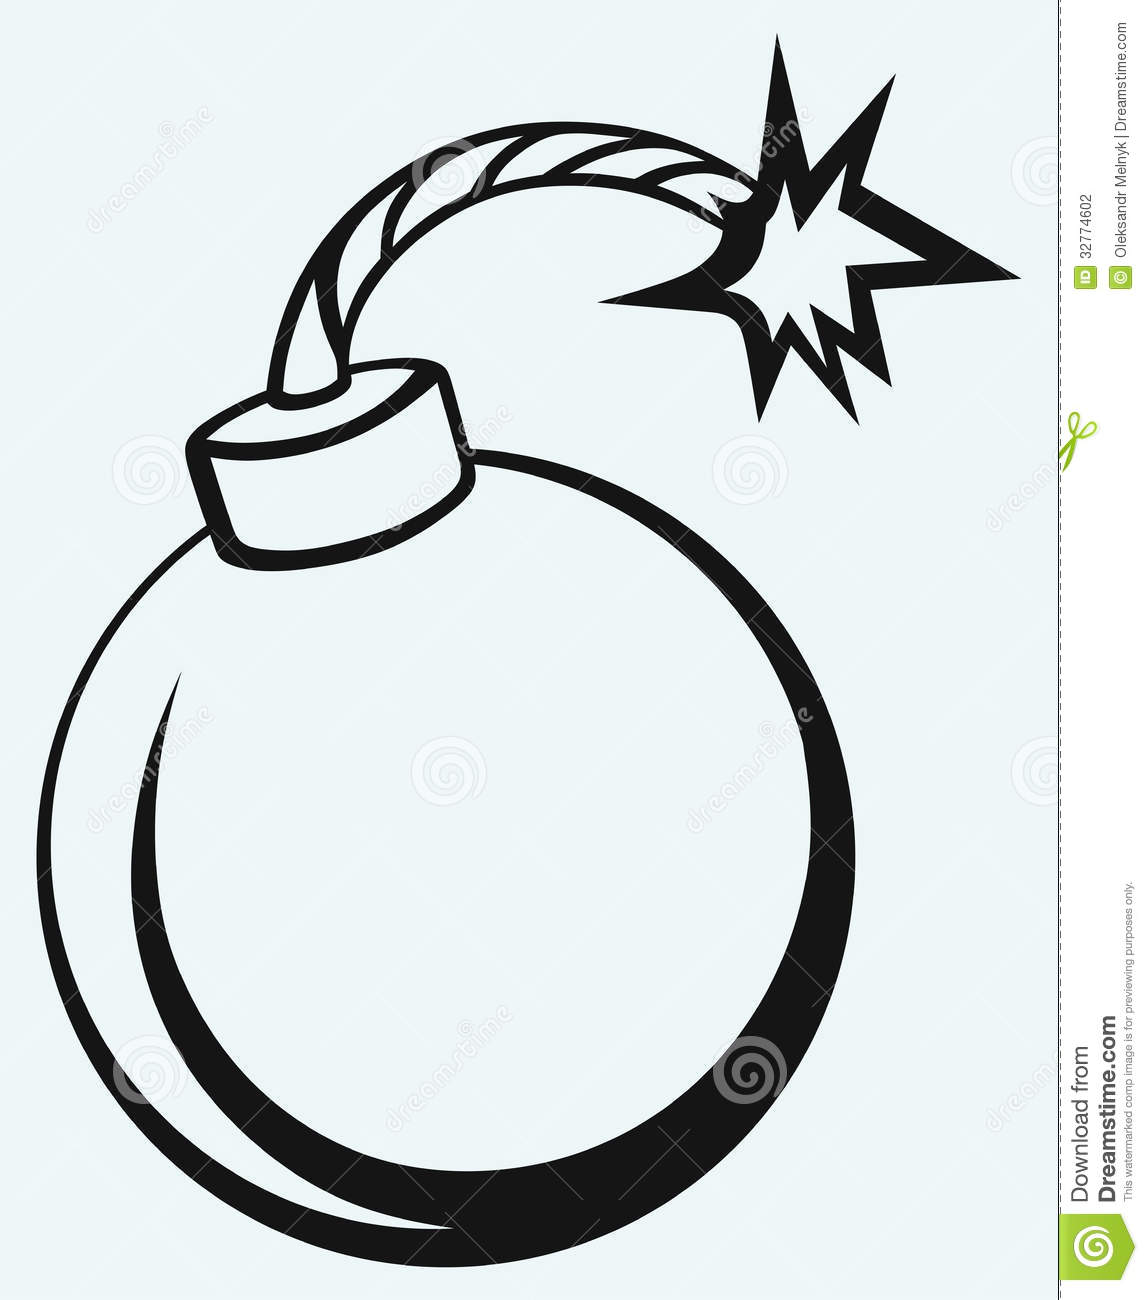 Bomb clipart sketch, Bomb sketch Transparent FREE for